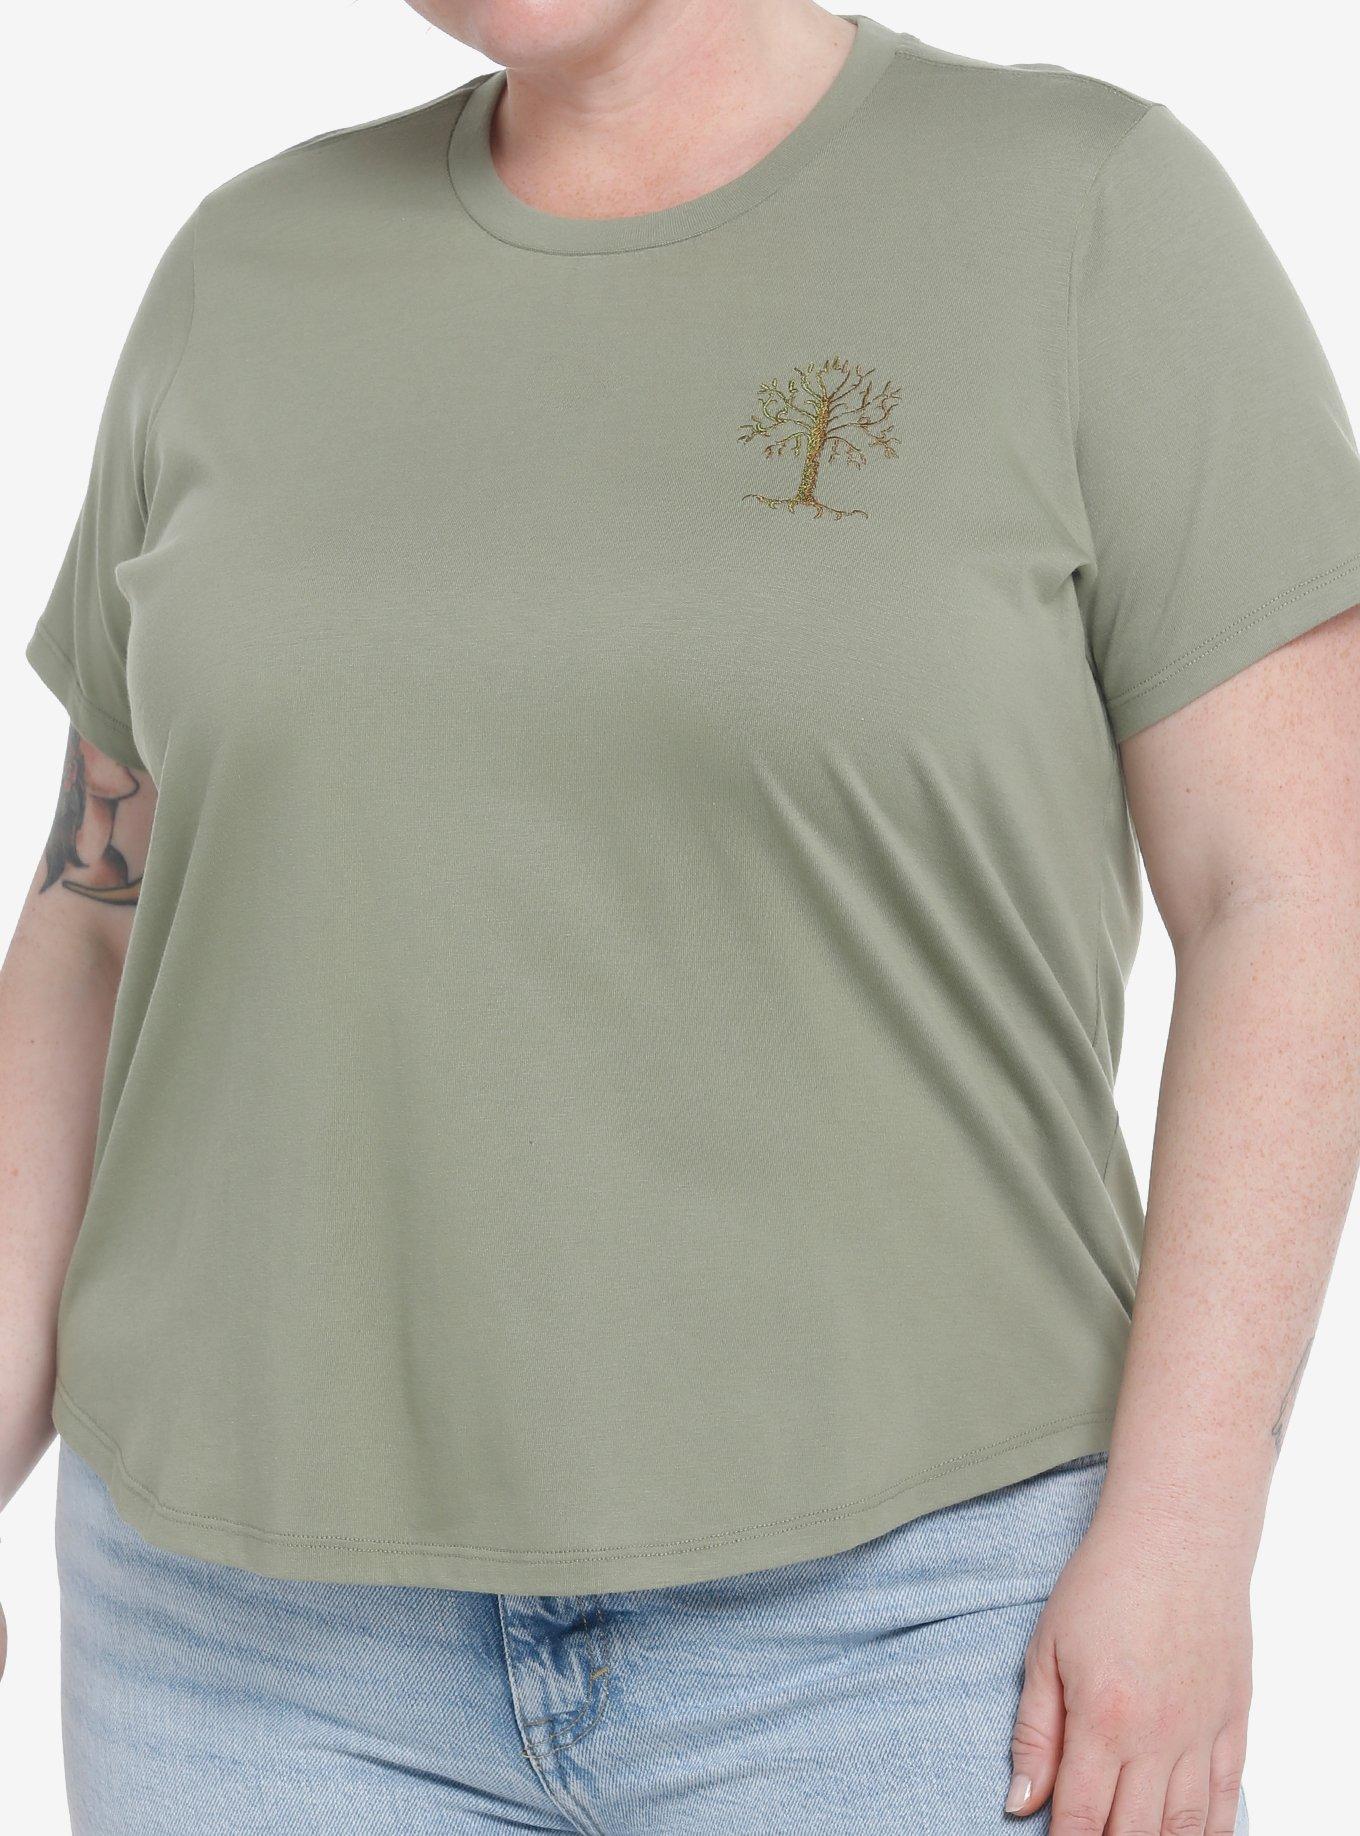 Her Universe The Lord Of The Rings Tree Of Gondor Scoop Neck Top Plus Size, OLIVE, hi-res